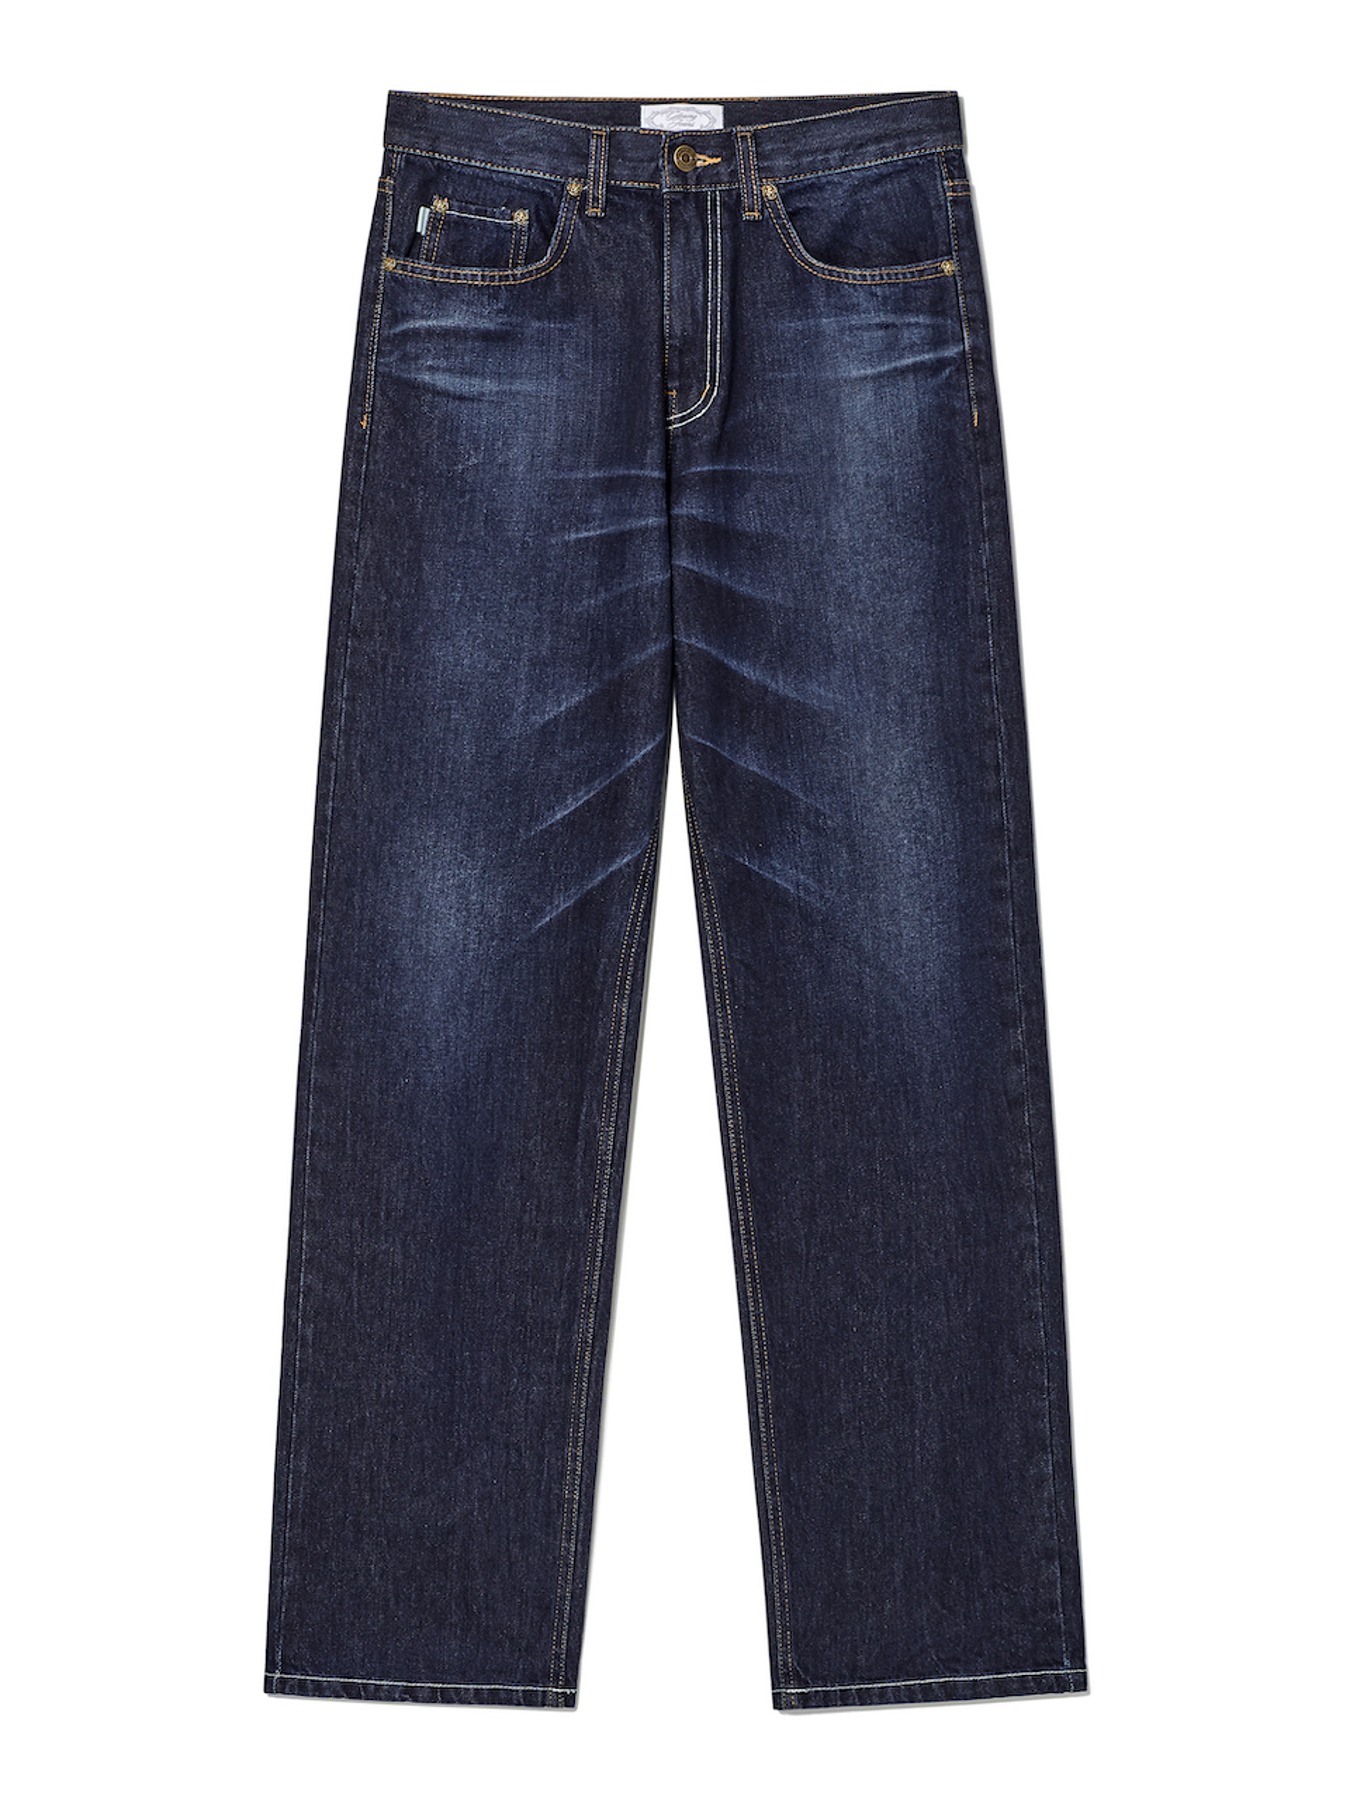 93 MID-RISE LOOSE FIT JEANS (INDIGO)